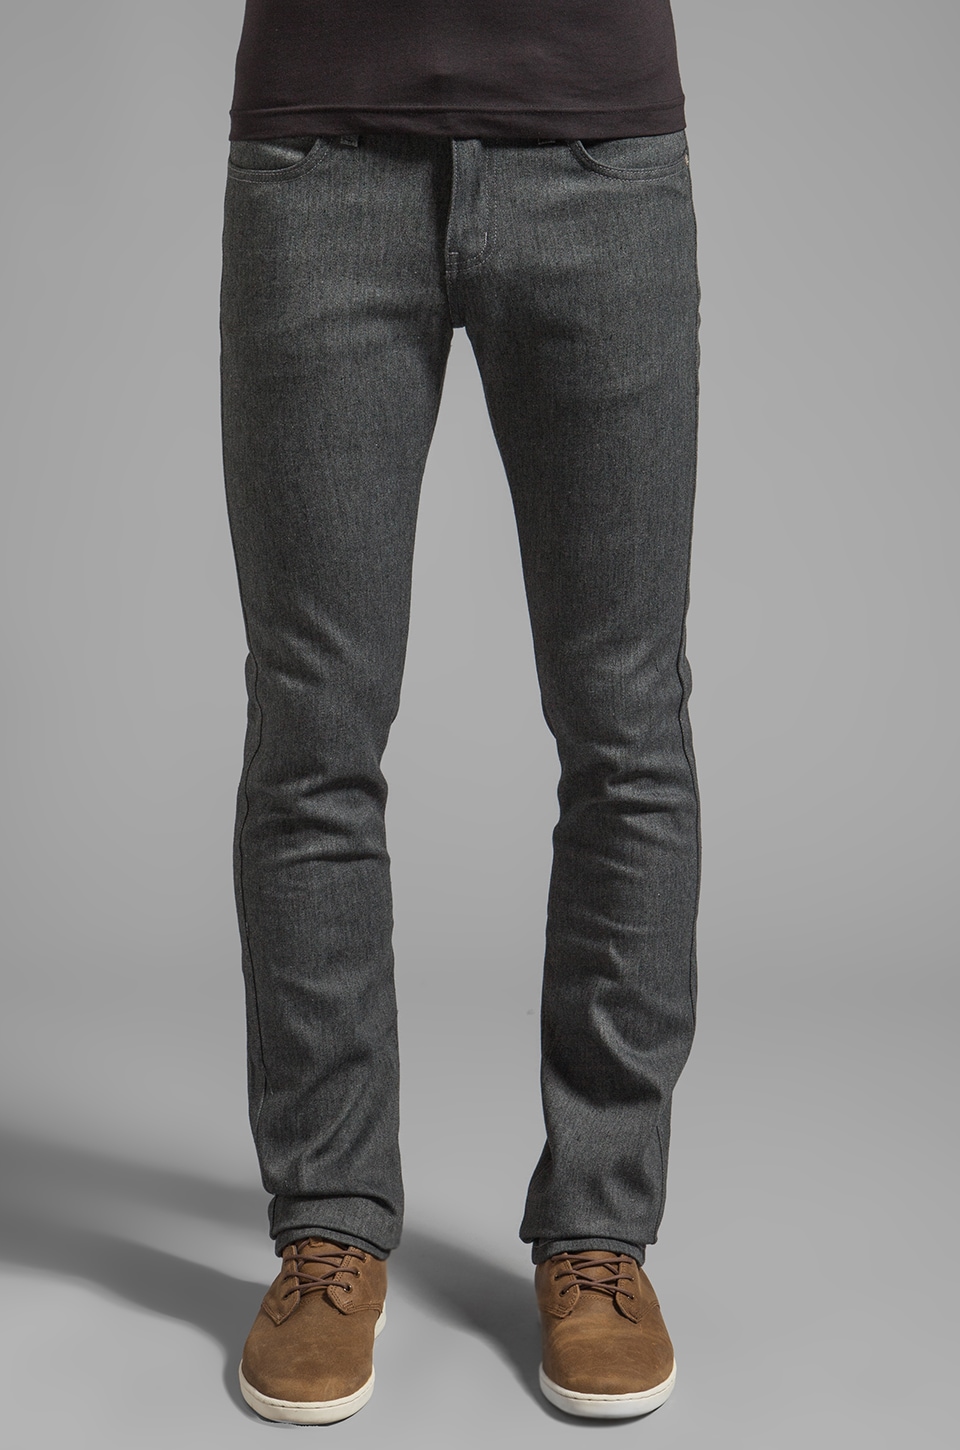 naked and famous denim skinny guy